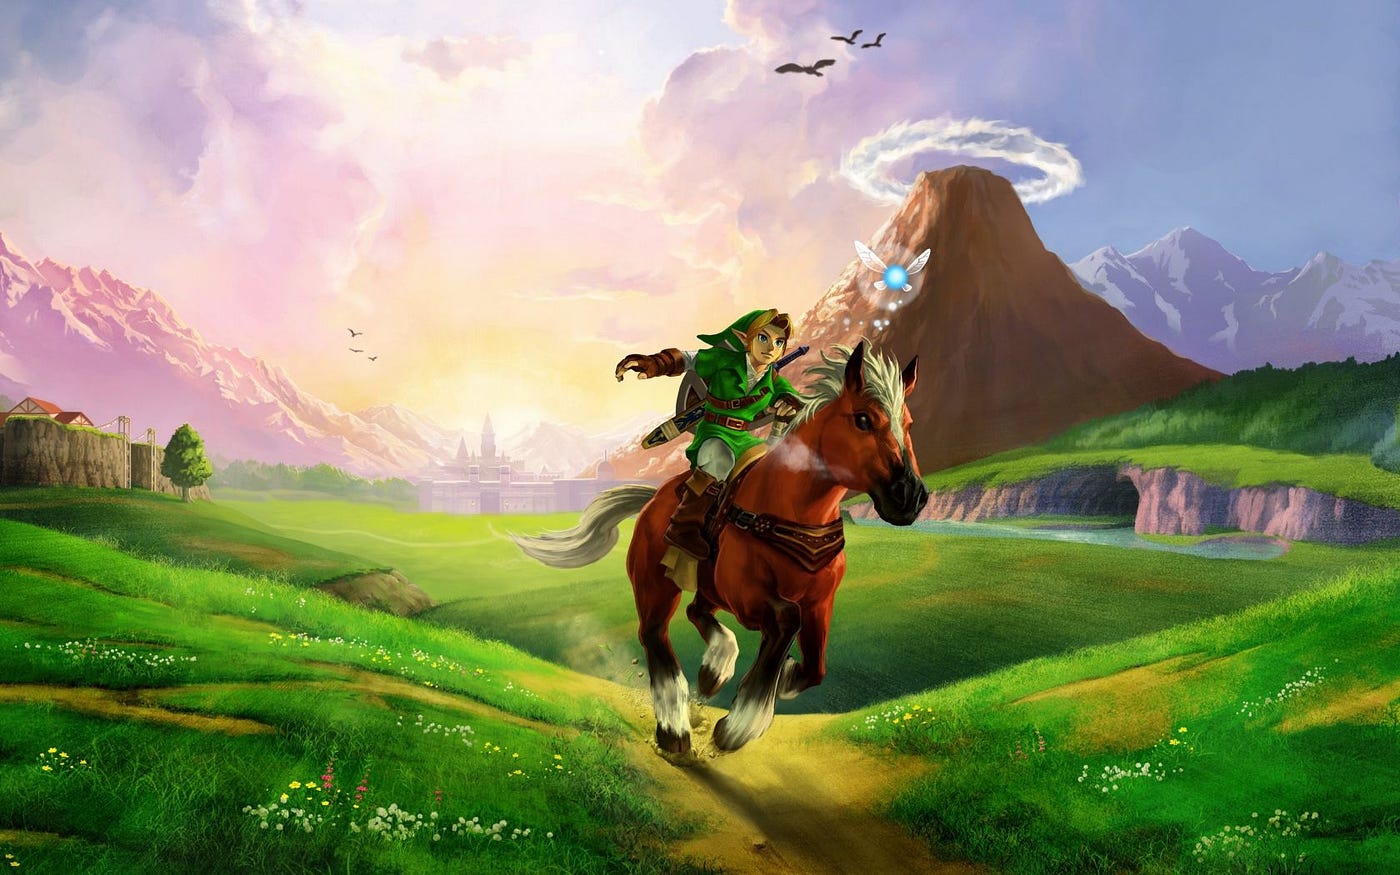 Why Is The Legend of Zelda: Ocarina of Time So Nostalgic?, by Sullyhogs